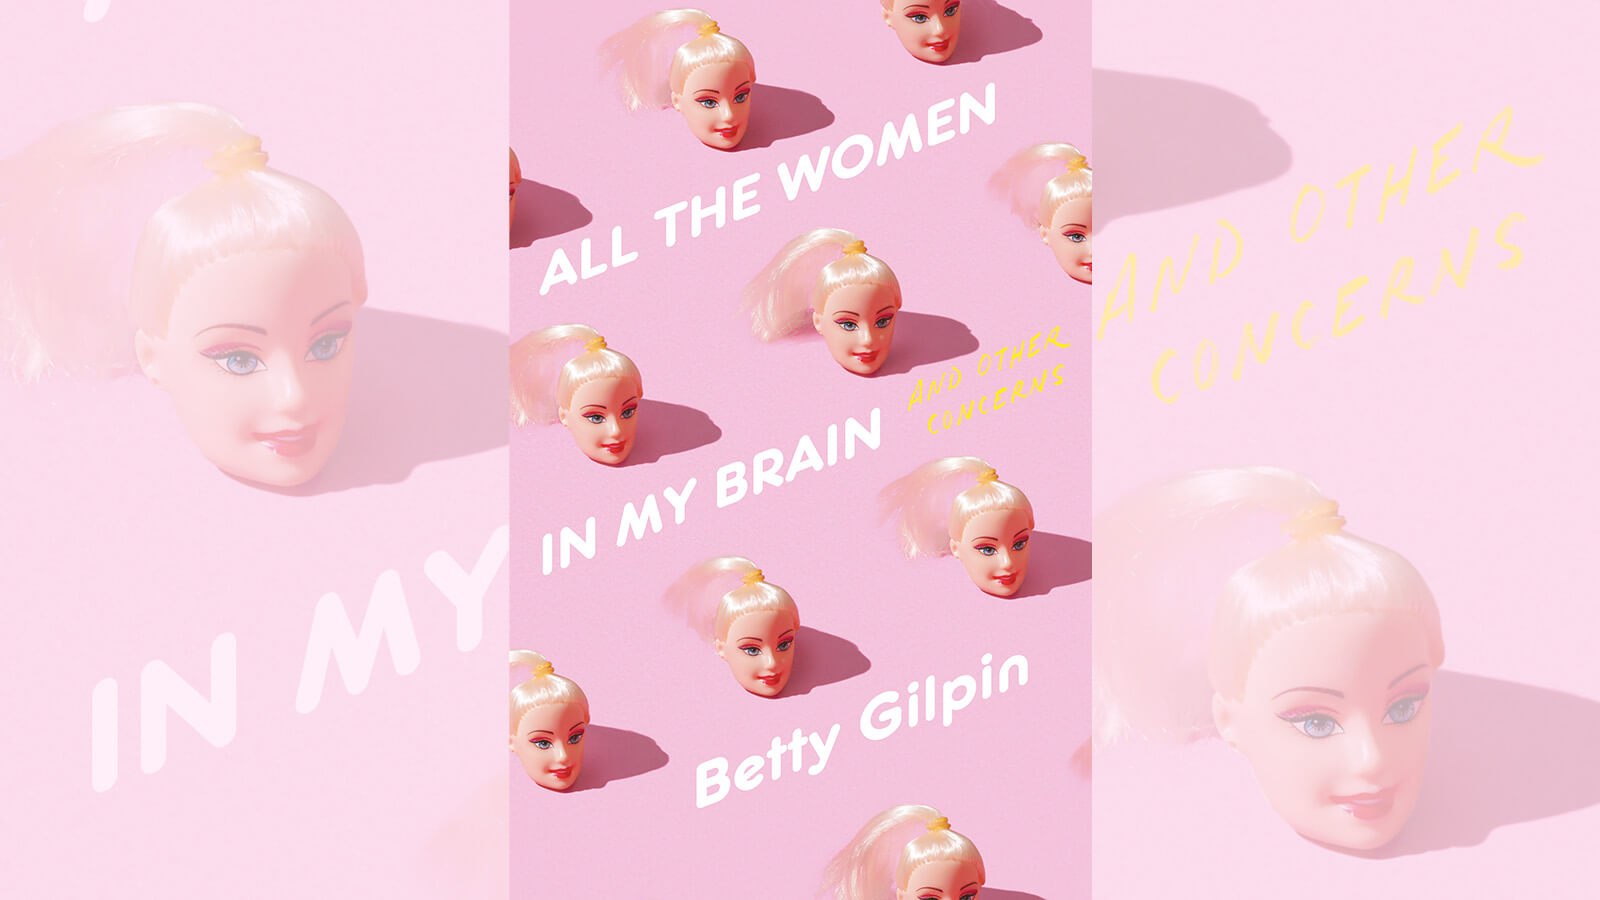 Image of the book cover of All The Women In My Brain by Betty Gilpin